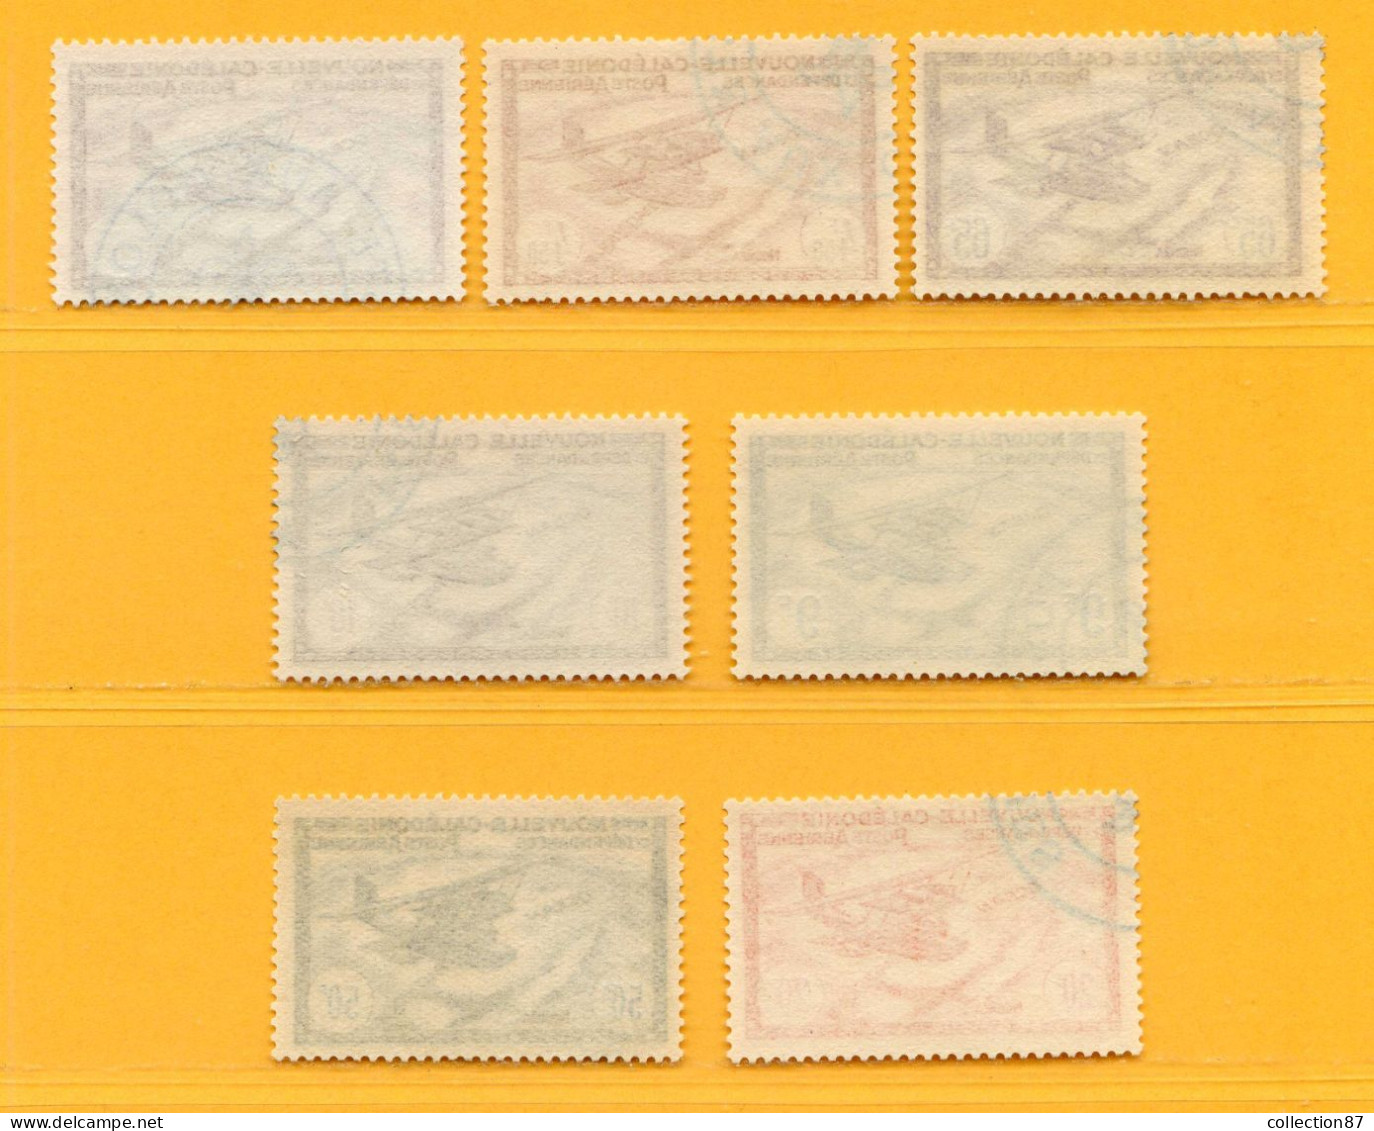 REF102 > NOUVELLE CALEDONIE > PA N° 39 à 45 Ø > RARE Oblitéré Poste Aux Colonies Dos Visible > Used Ø - NCE - Used Stamps